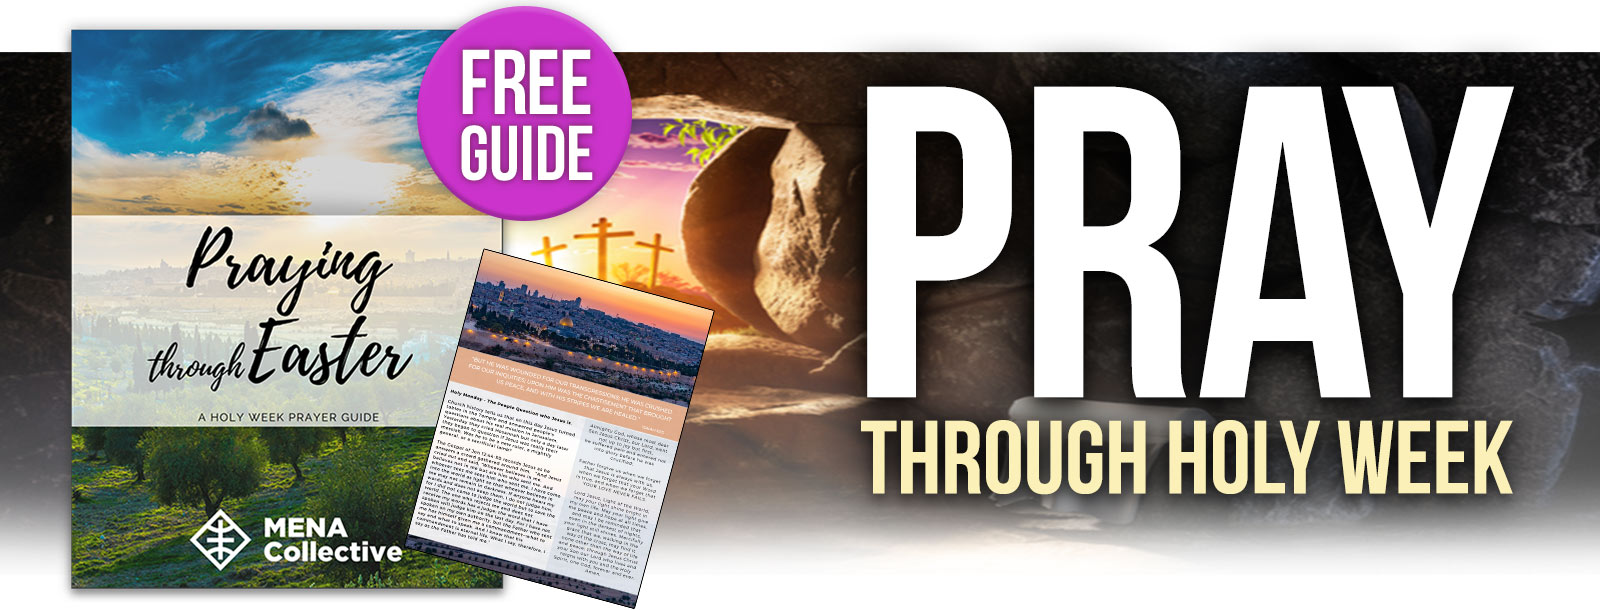 Get Your Free Prayer Guide for the Week of Easter